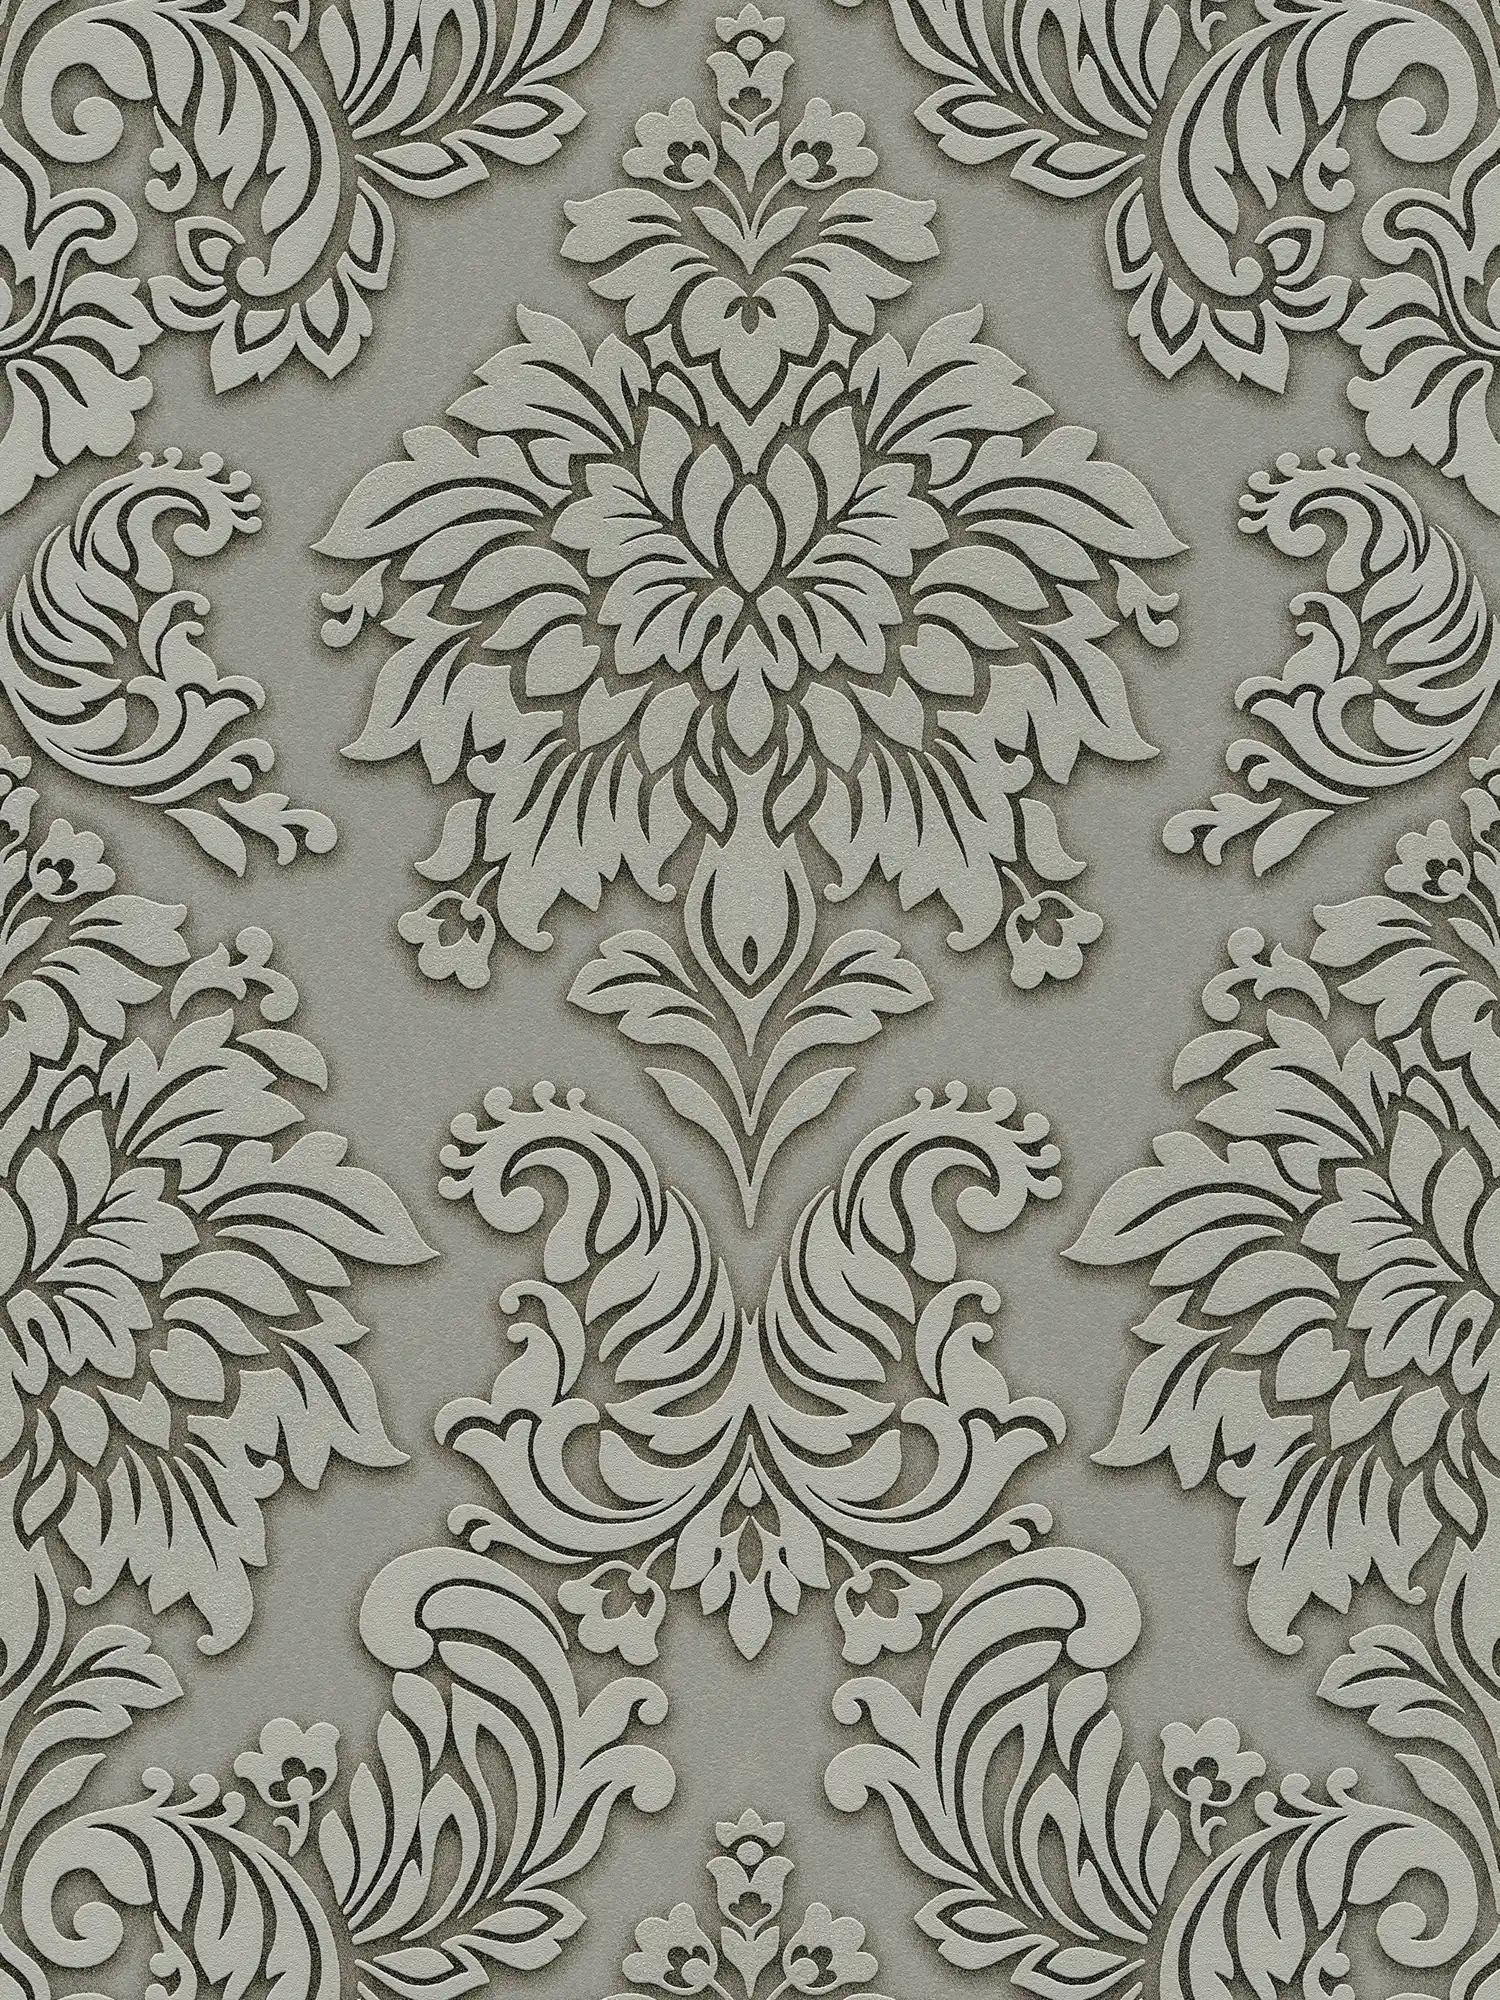 Baroque wallpaper ornaments with glitter effect - grey, silver, beige
